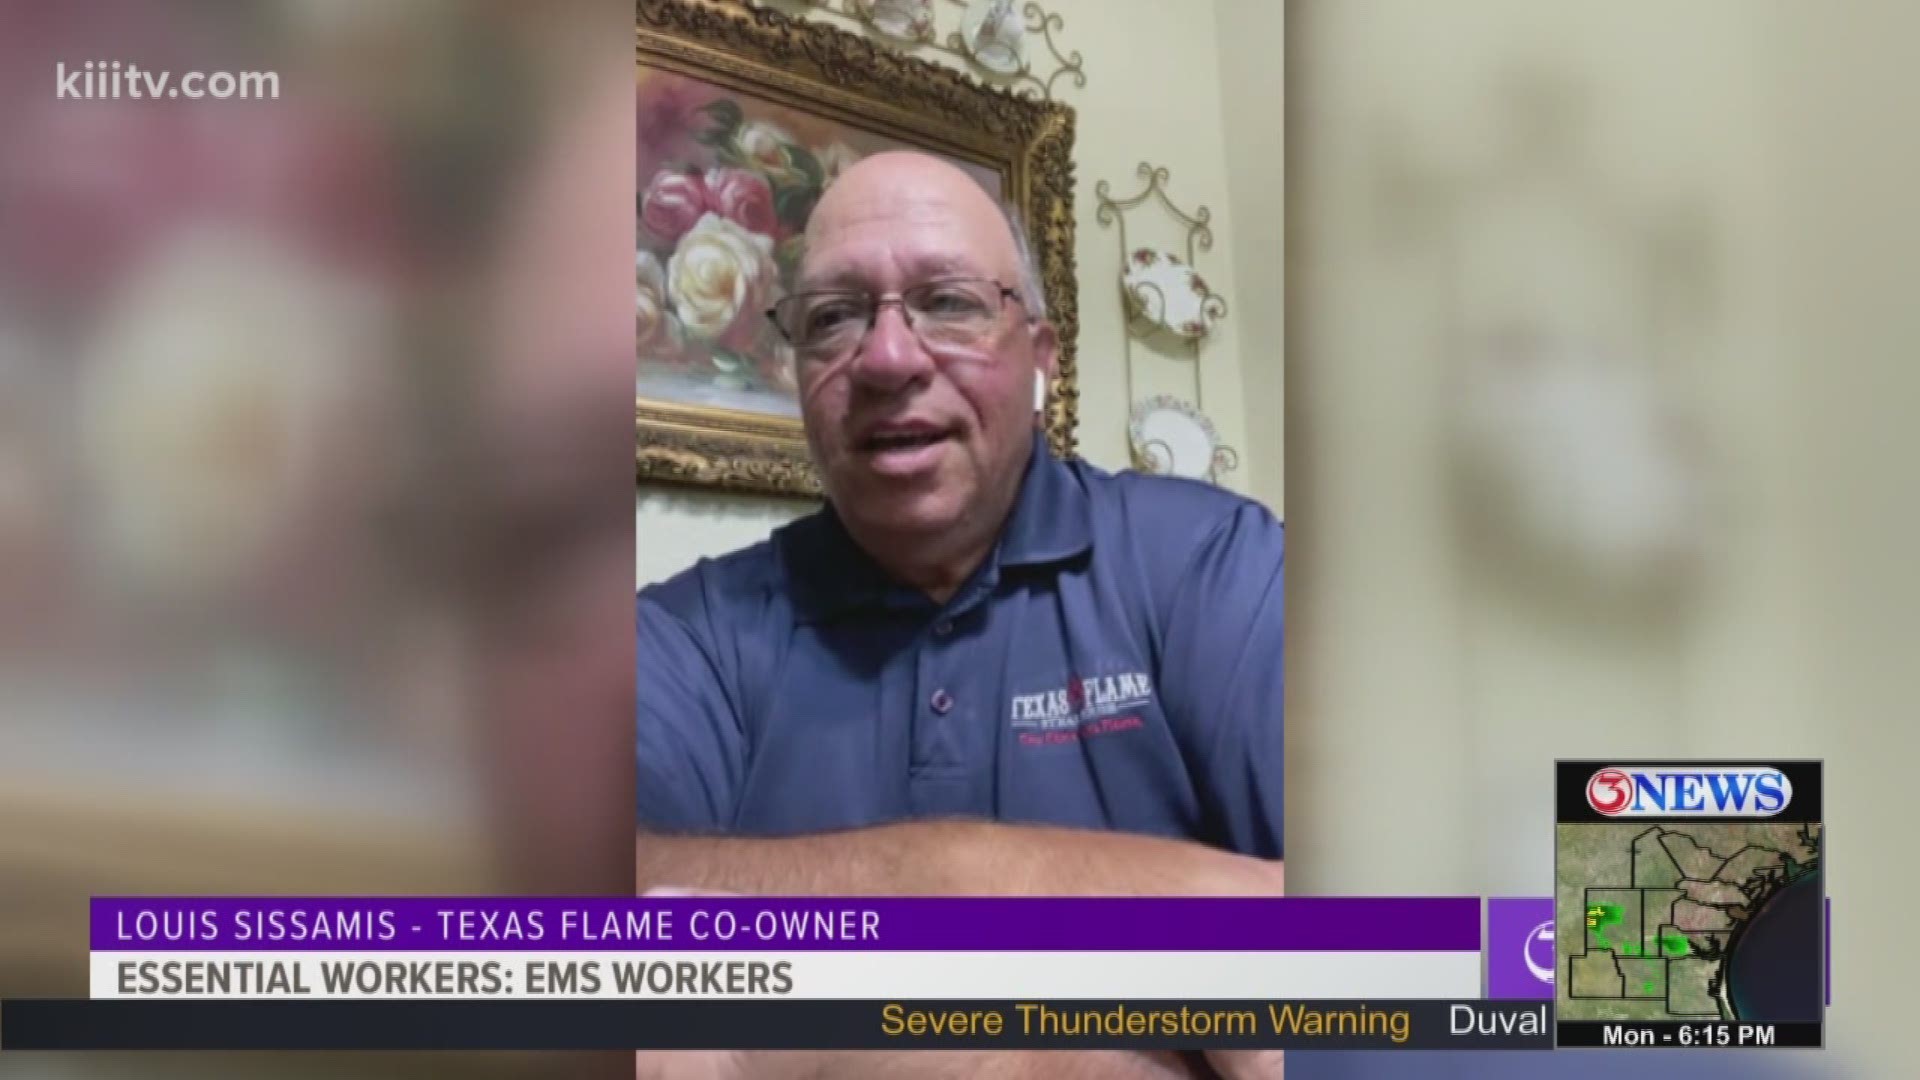 Texas Flame's Co-owner Louis Sissamis talks about the challenges he's facing during the coronavirus pandemic.